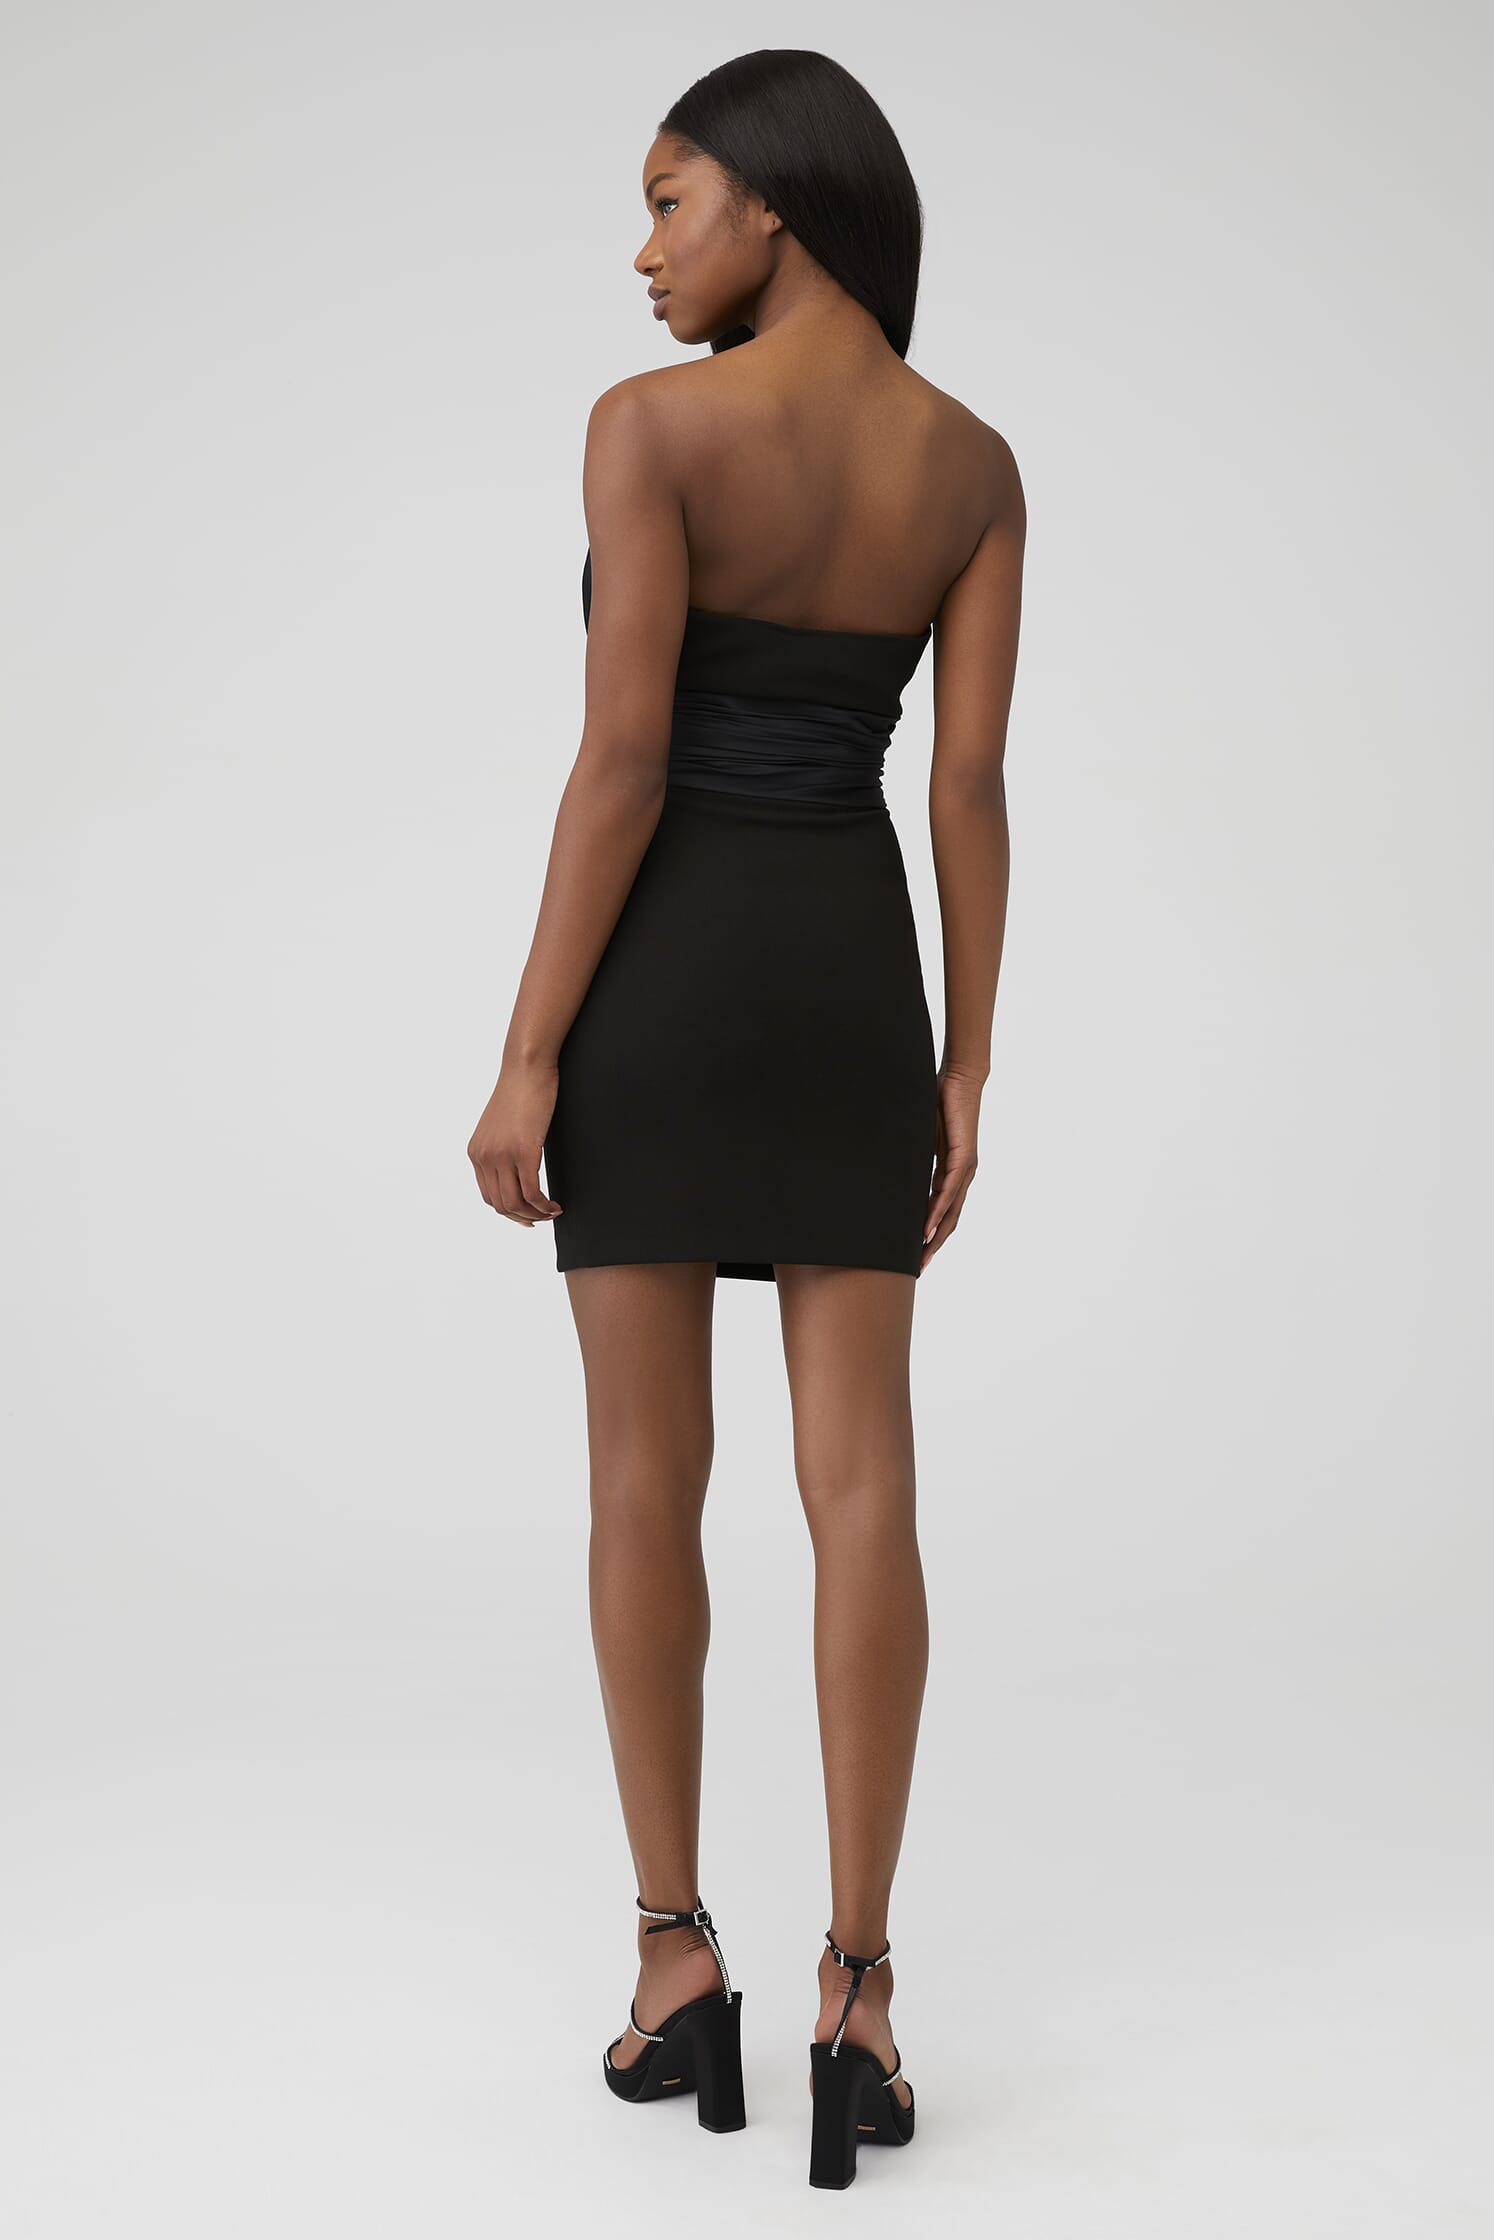 LIKELY | Lally Dress in Black| FashionPass